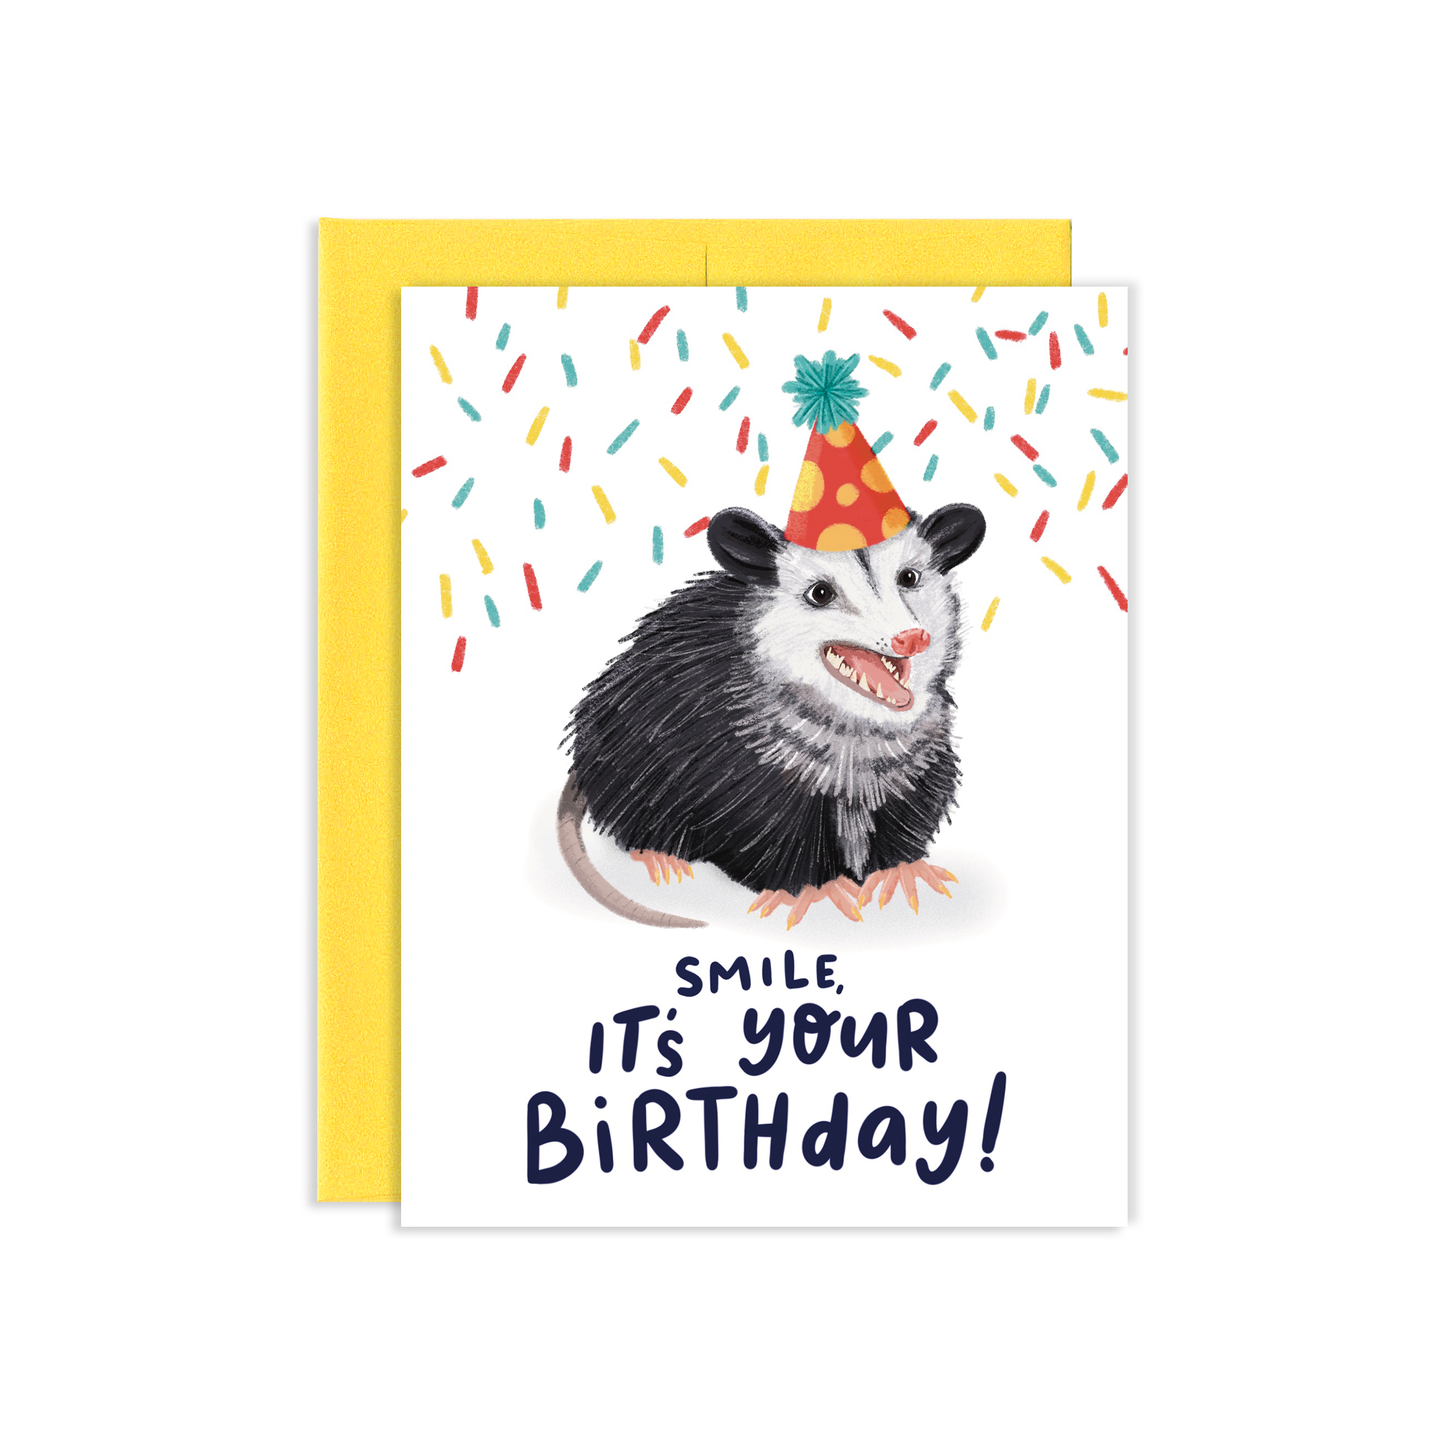 Smile! It's Your Birthday Opossum Greeting Card